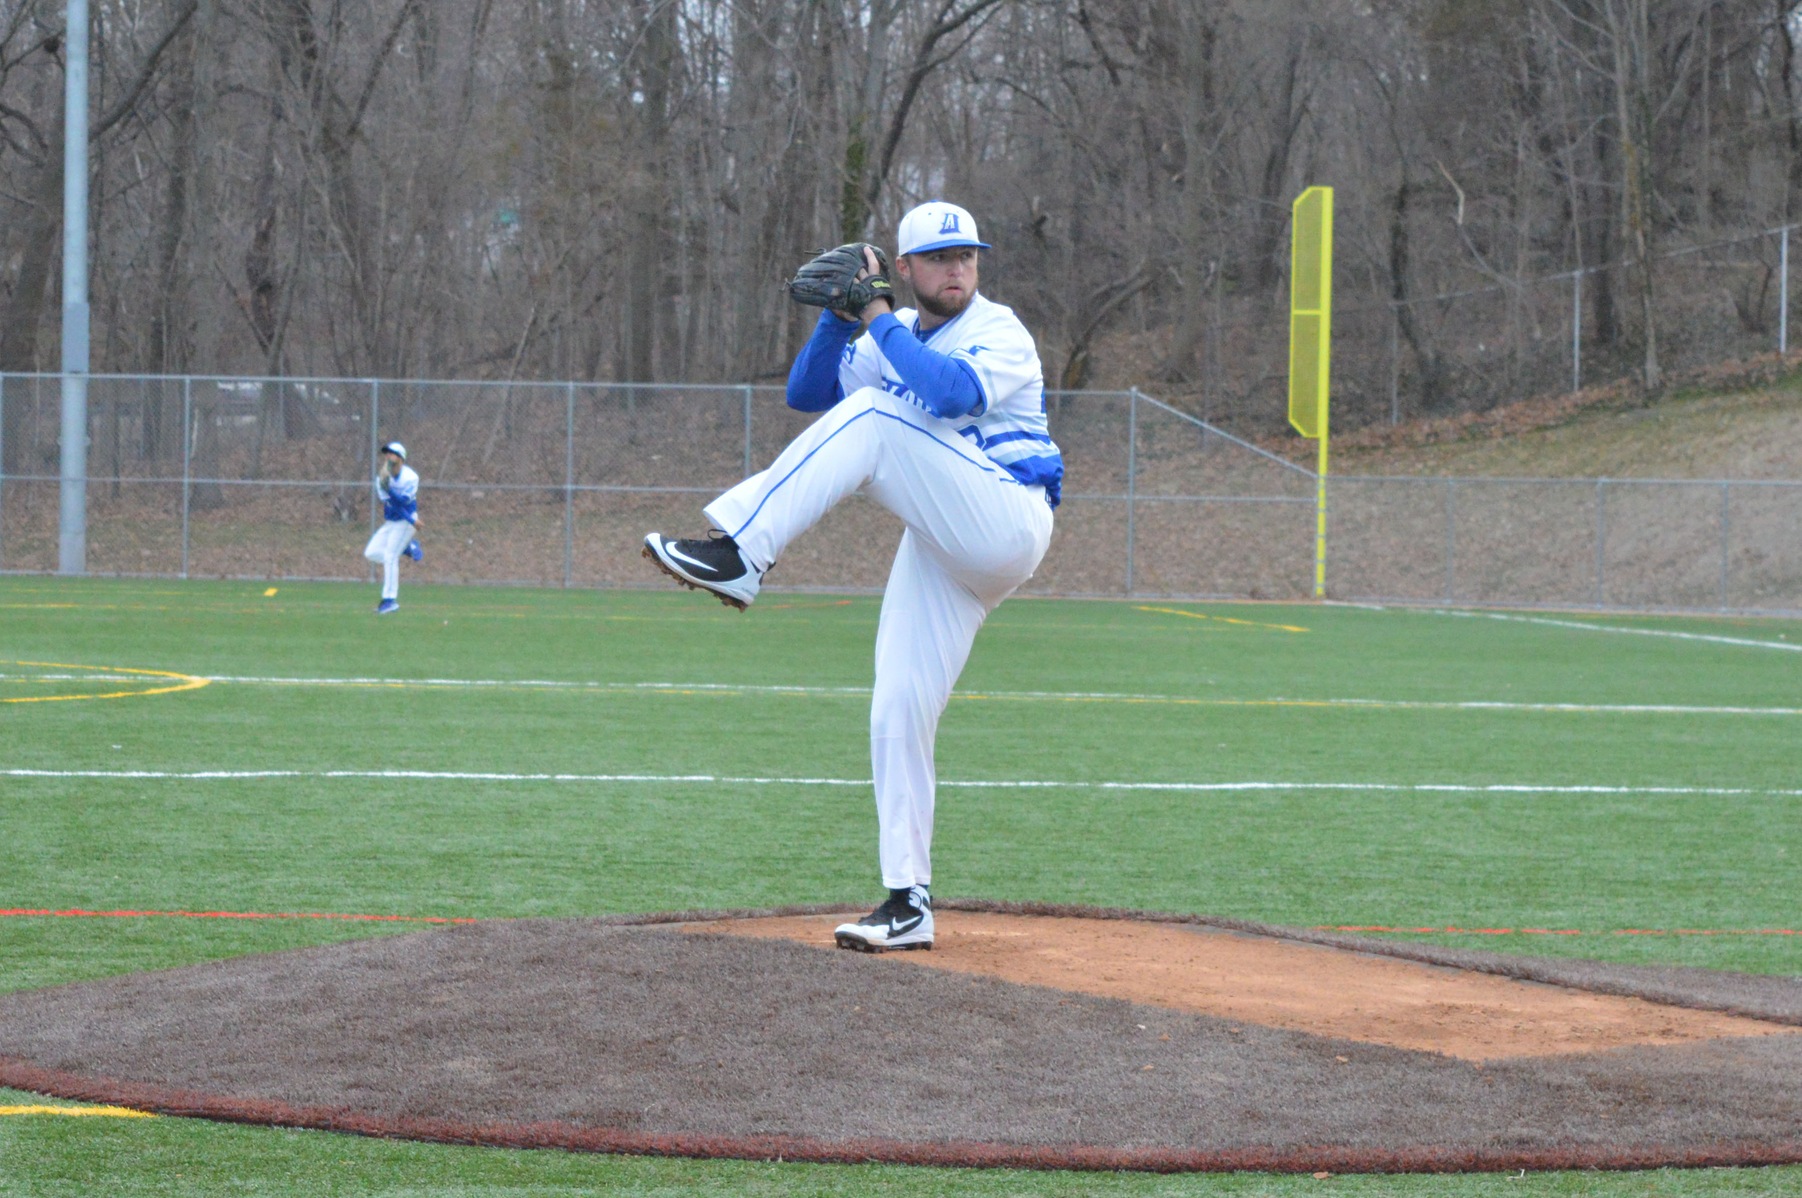 Falcons Swept by Saint Joseph's (Me.) in Conference Doubleheader